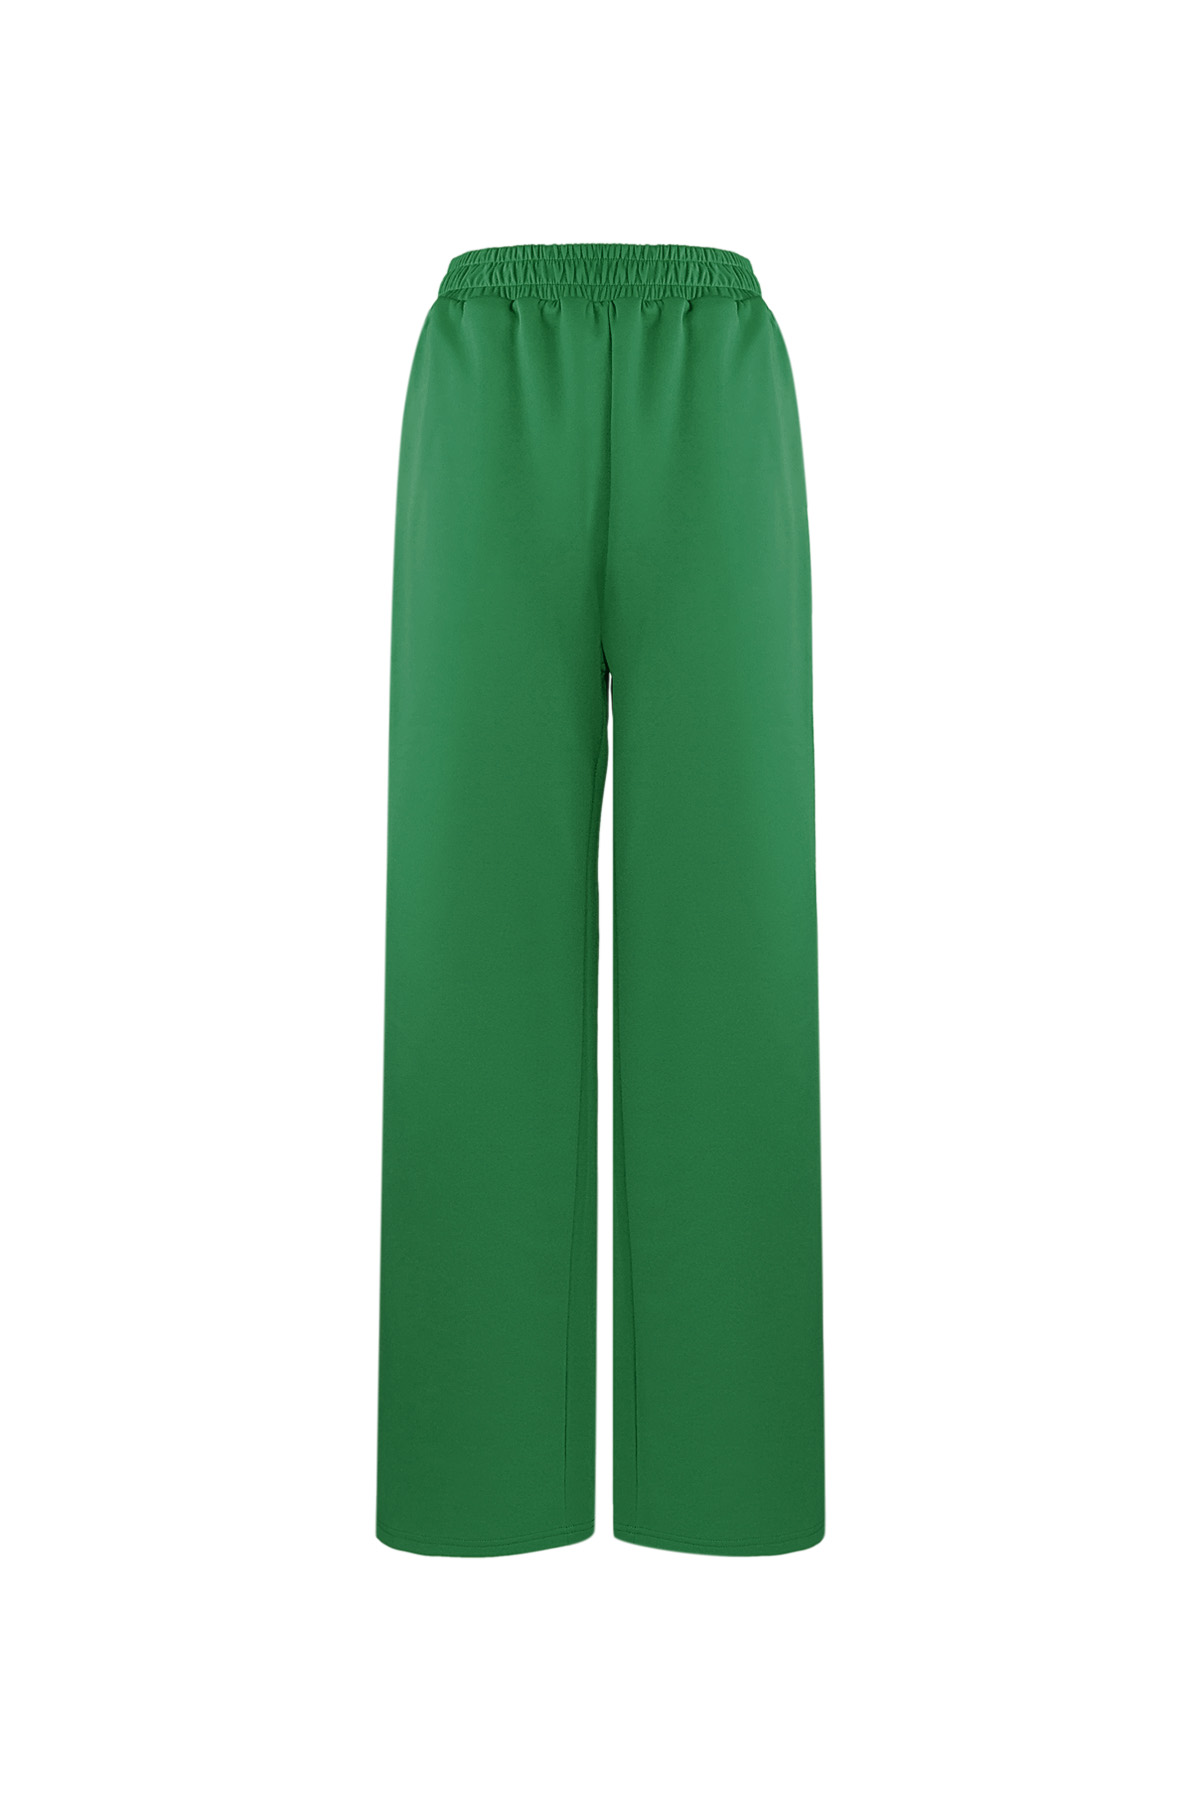 Striped must have pants - green L h5 